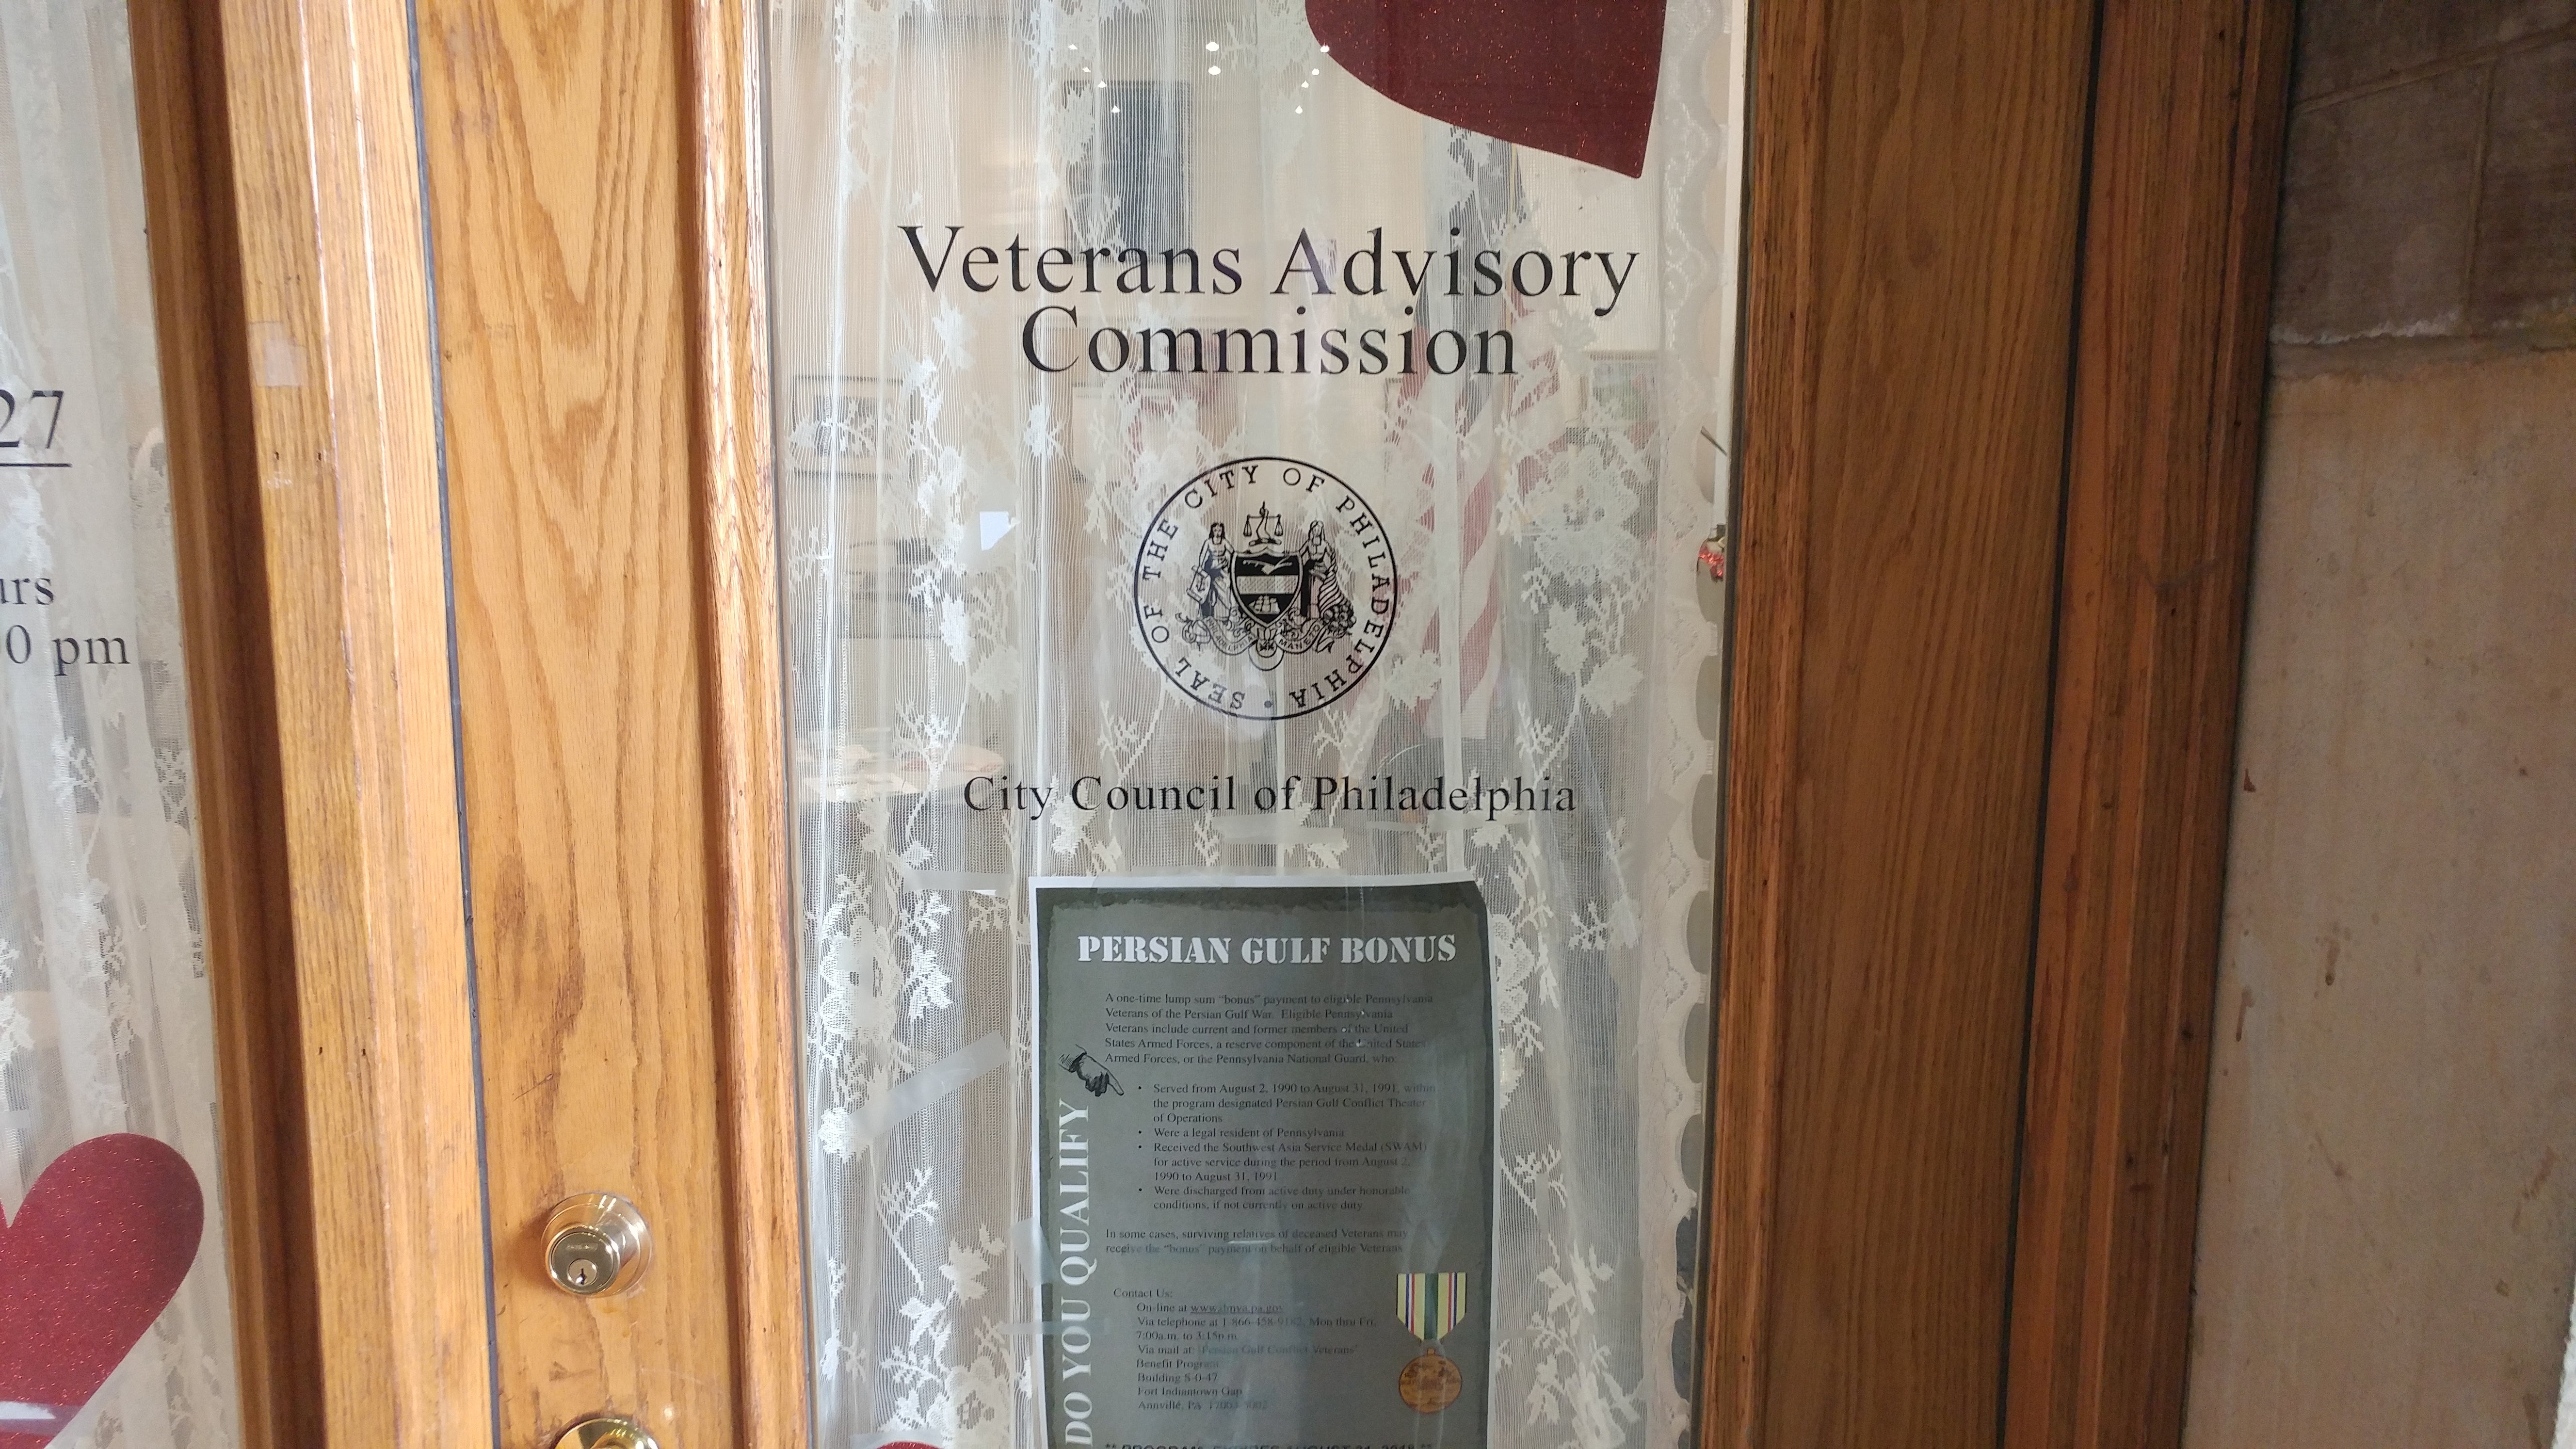  Philadelphia's Veterans Advisory Commission is one place that stores paper records. (Tom MacDonald/WHYY) 